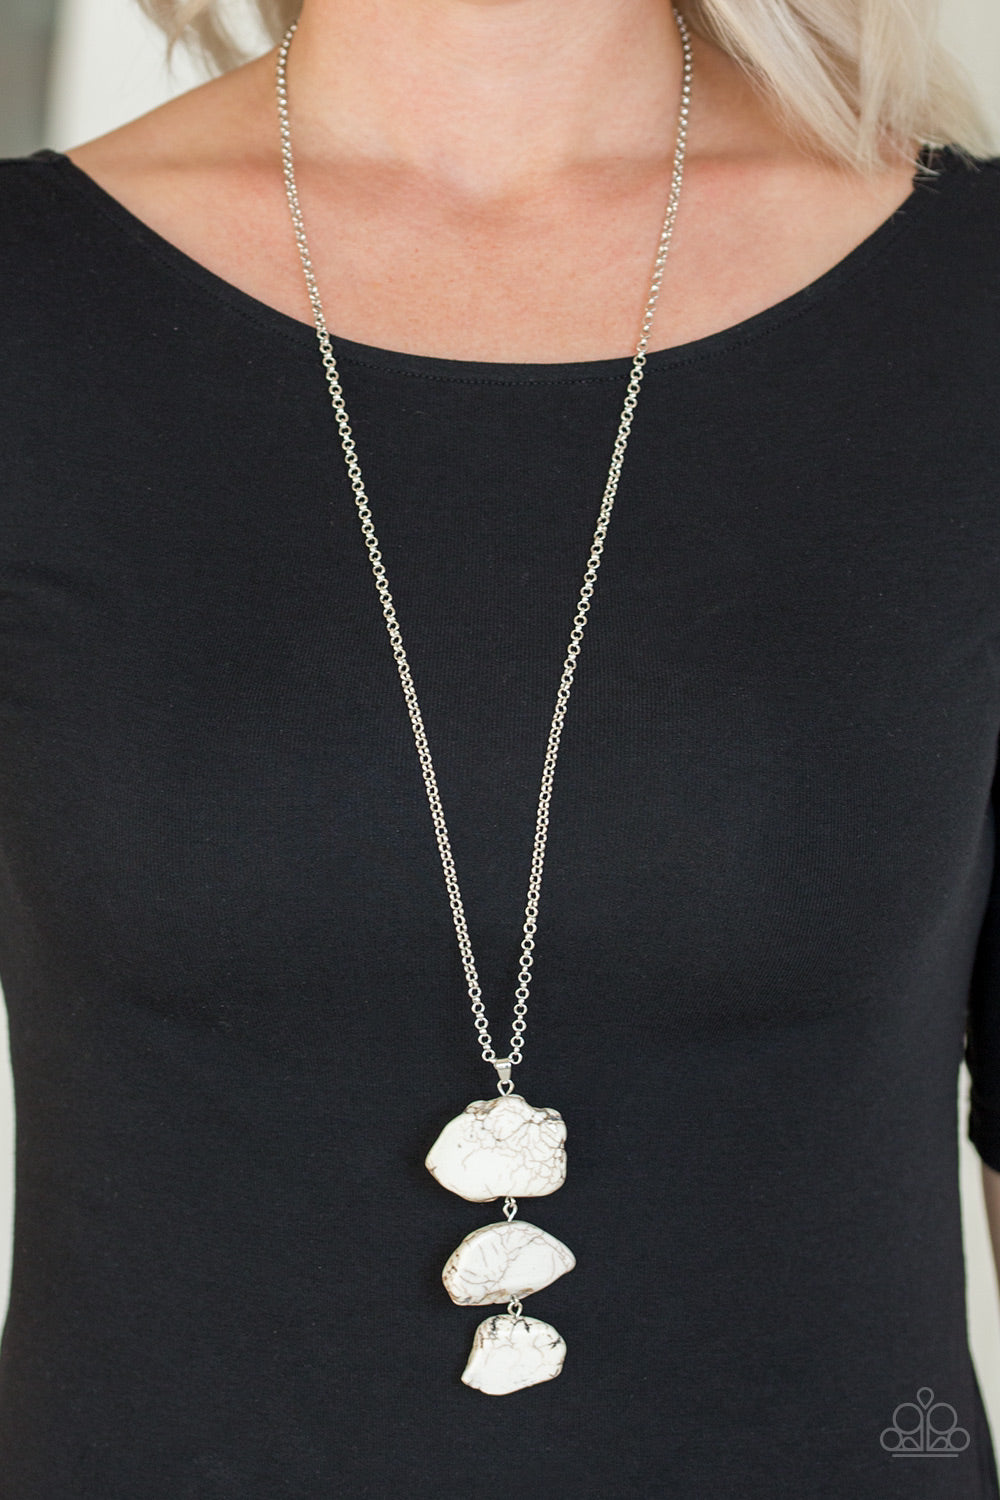 Paparazzi Jewelry Necklace On The ROAM Again - White